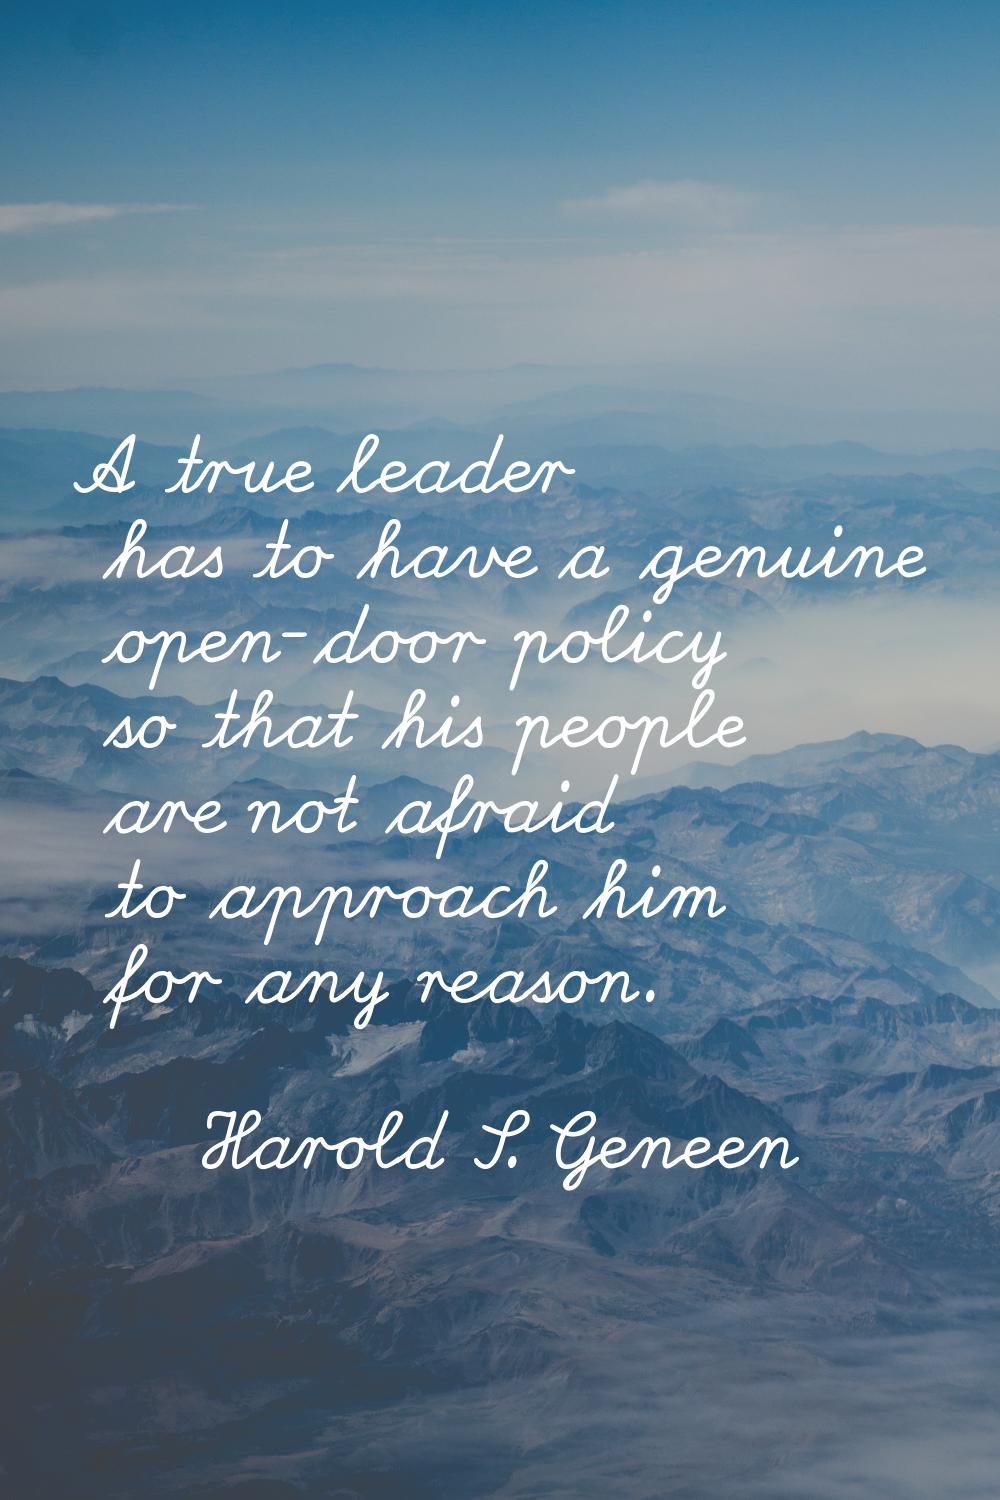 A true leader has to have a genuine open-door policy so that his people are not afraid to approach 